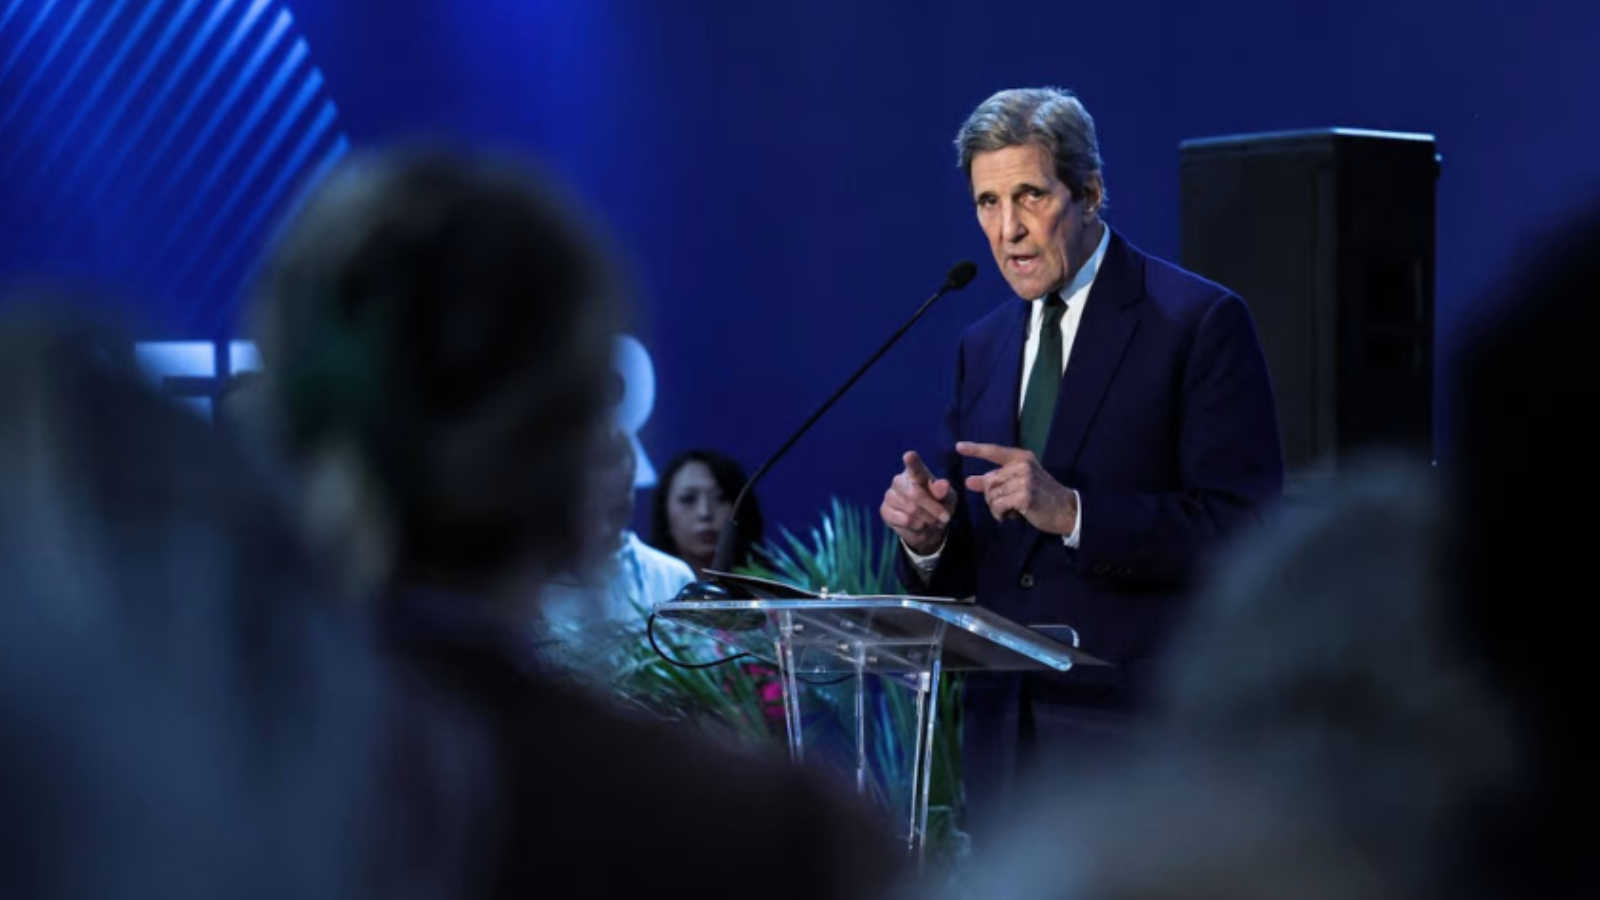 COP27: John Kerry calls on private sector to lead decarbonisation efforts, keep goal of 1.5 degrees ‘alive’